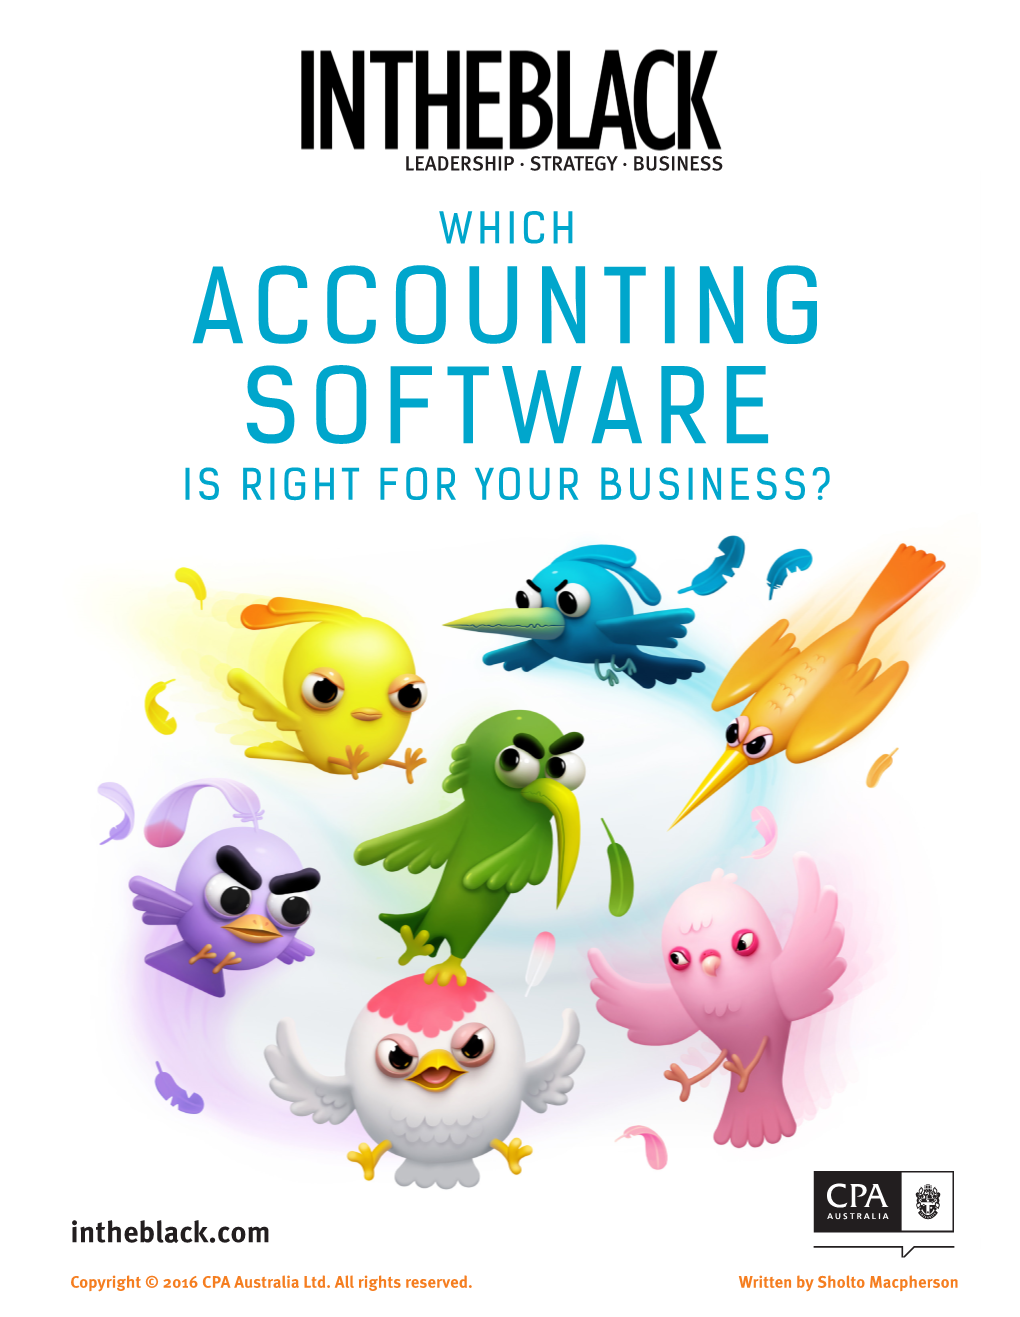 Accounting Software Is Right for Your Business?